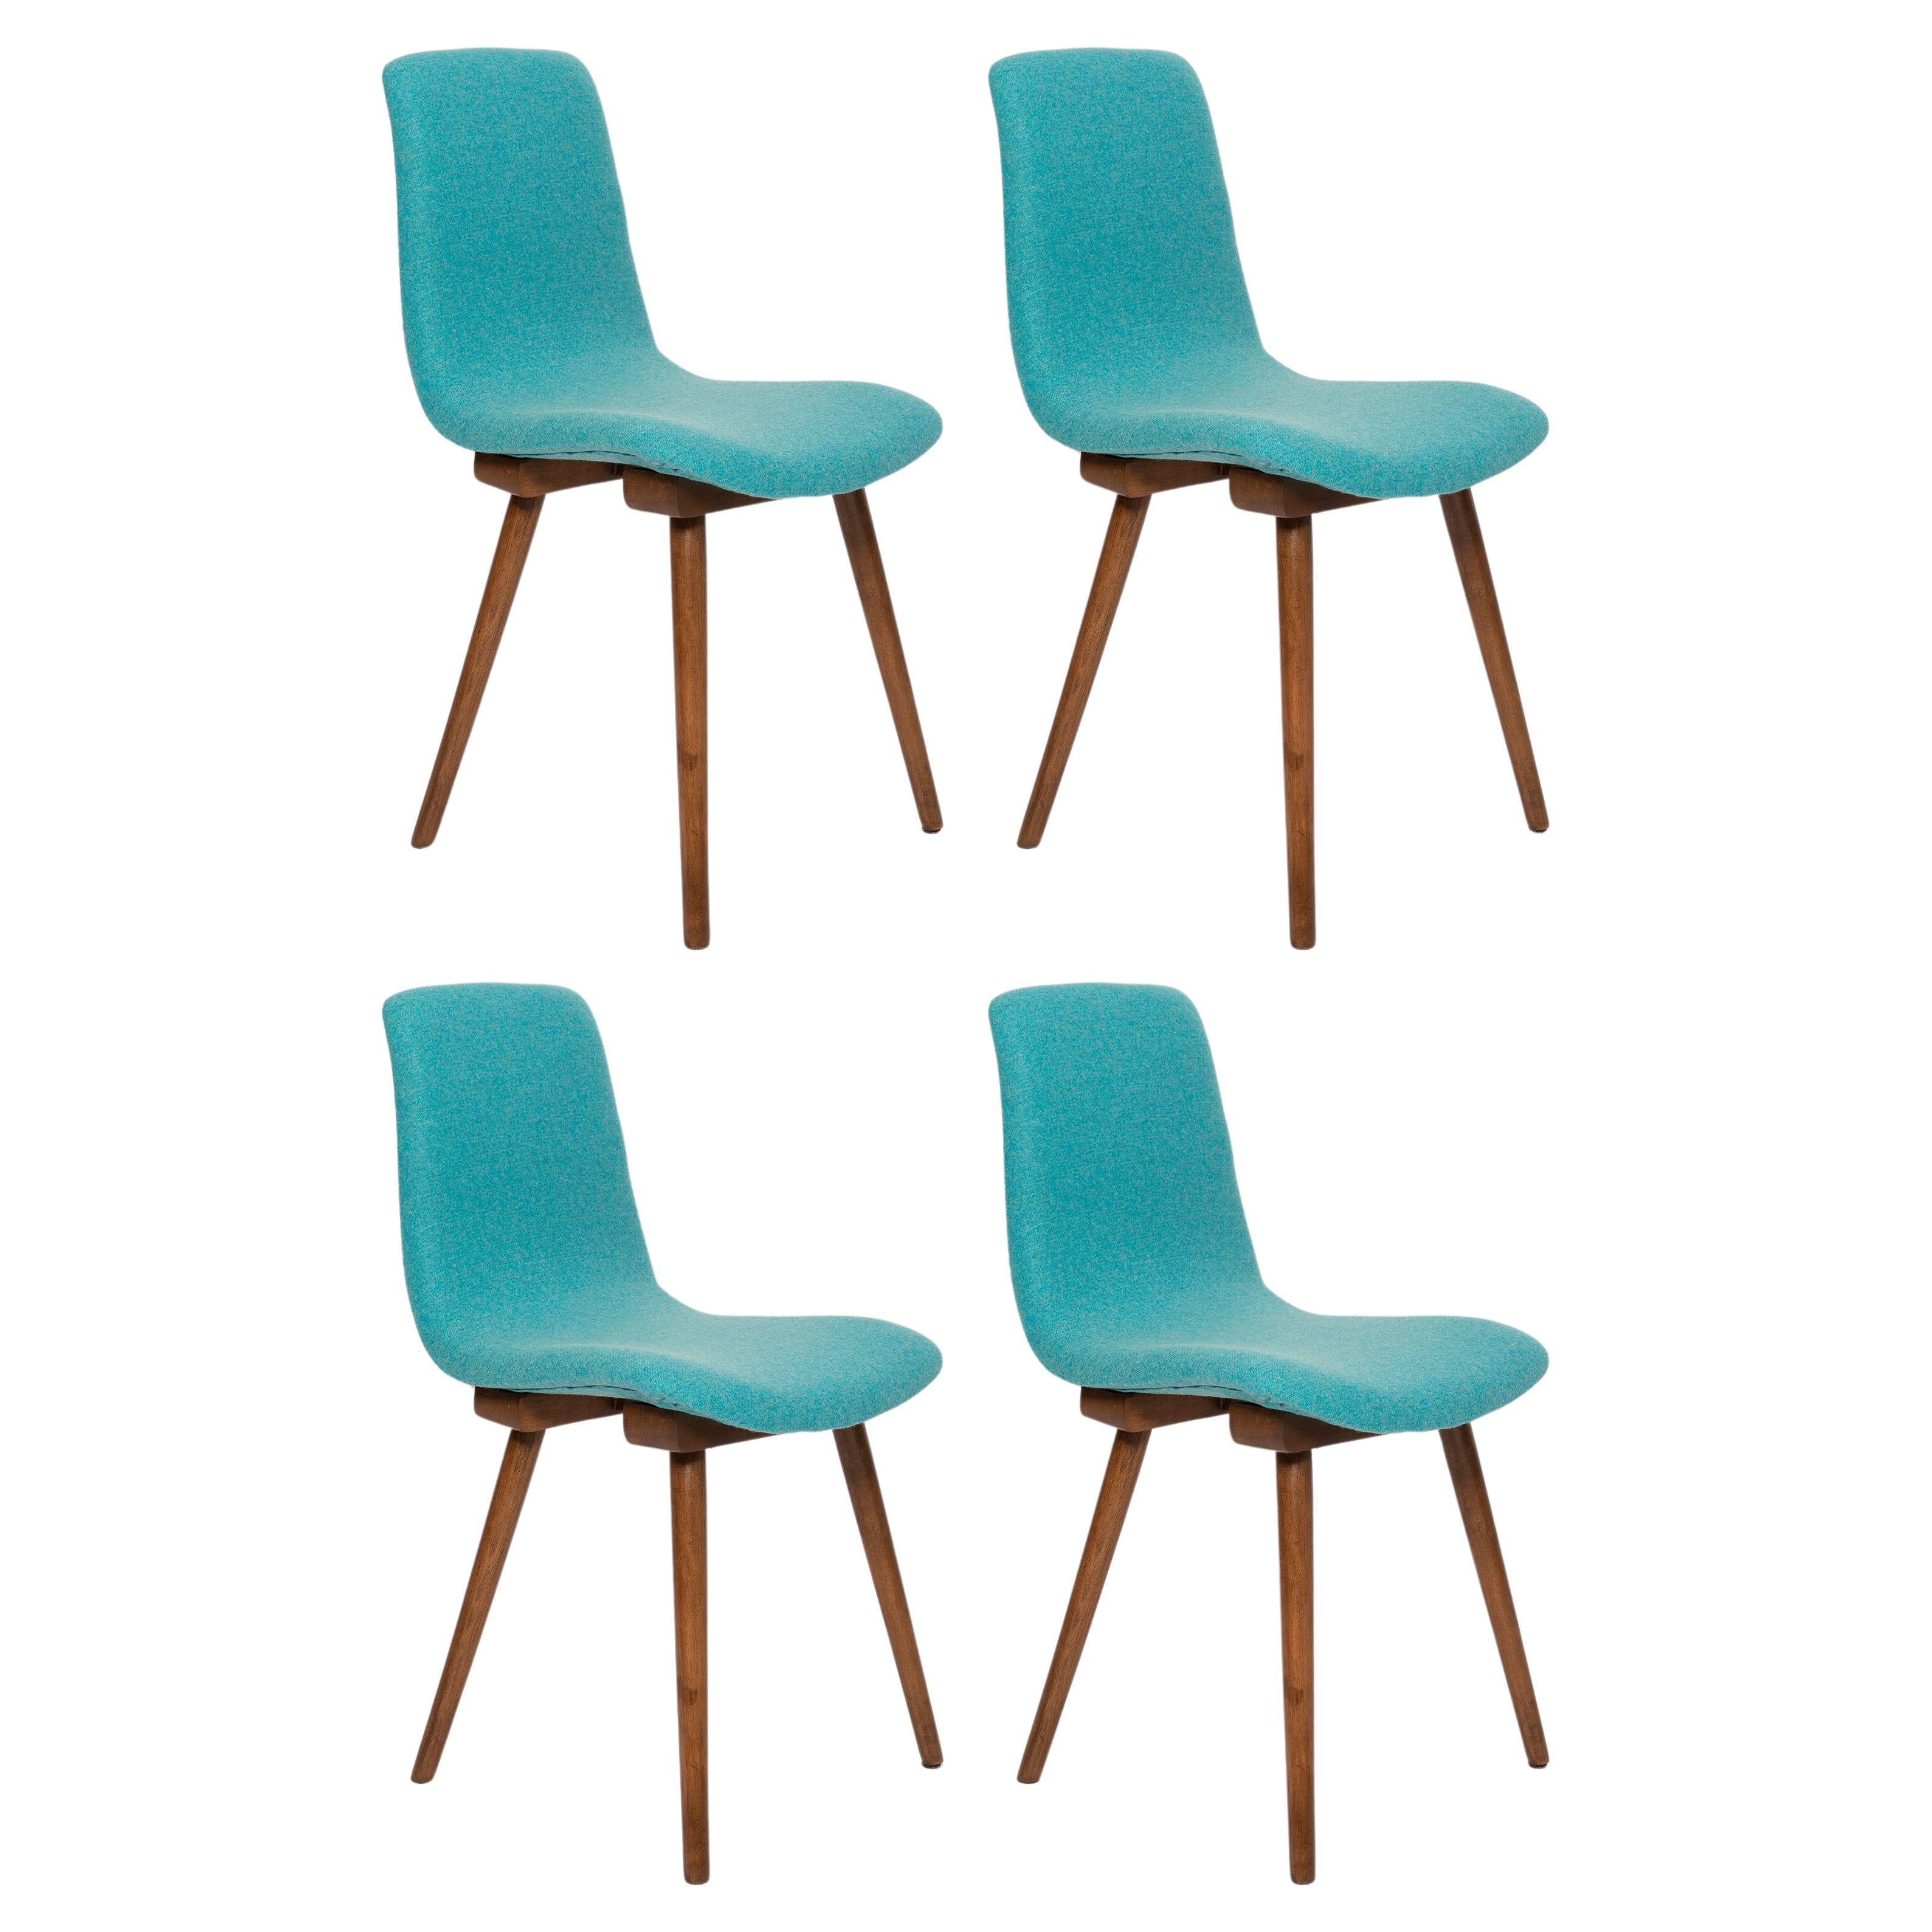 Set of Four Mid Century Acqua Wool Vintage Chairs, Fameg Factory, Europe, 1960s